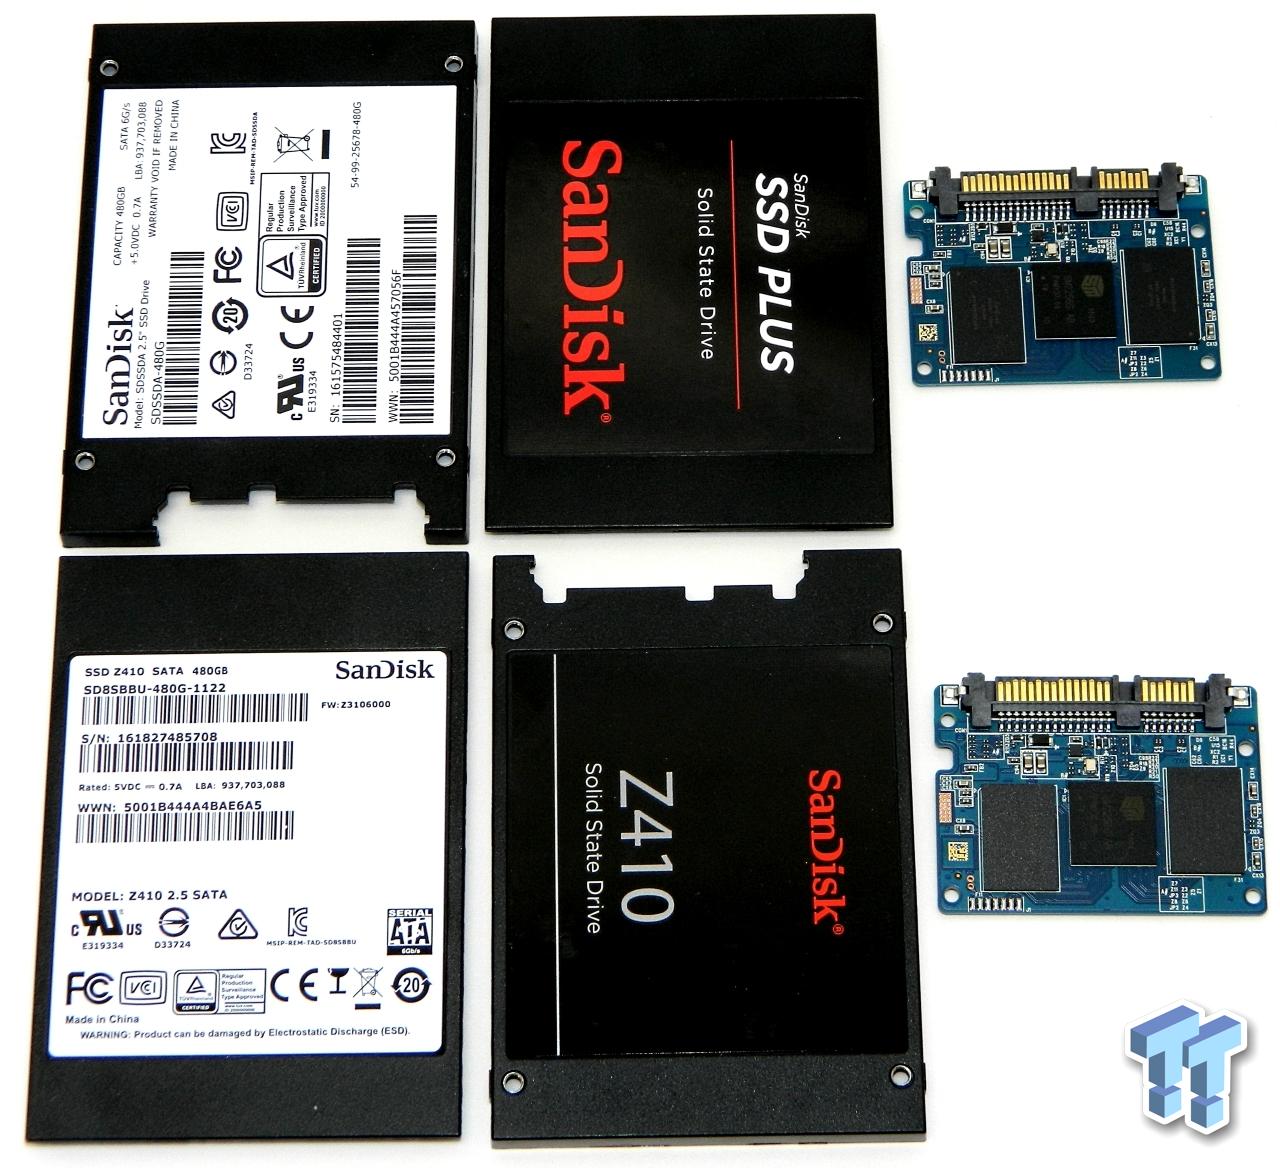 SanDisk SSD Plus and Z410 SATA III SSD Review